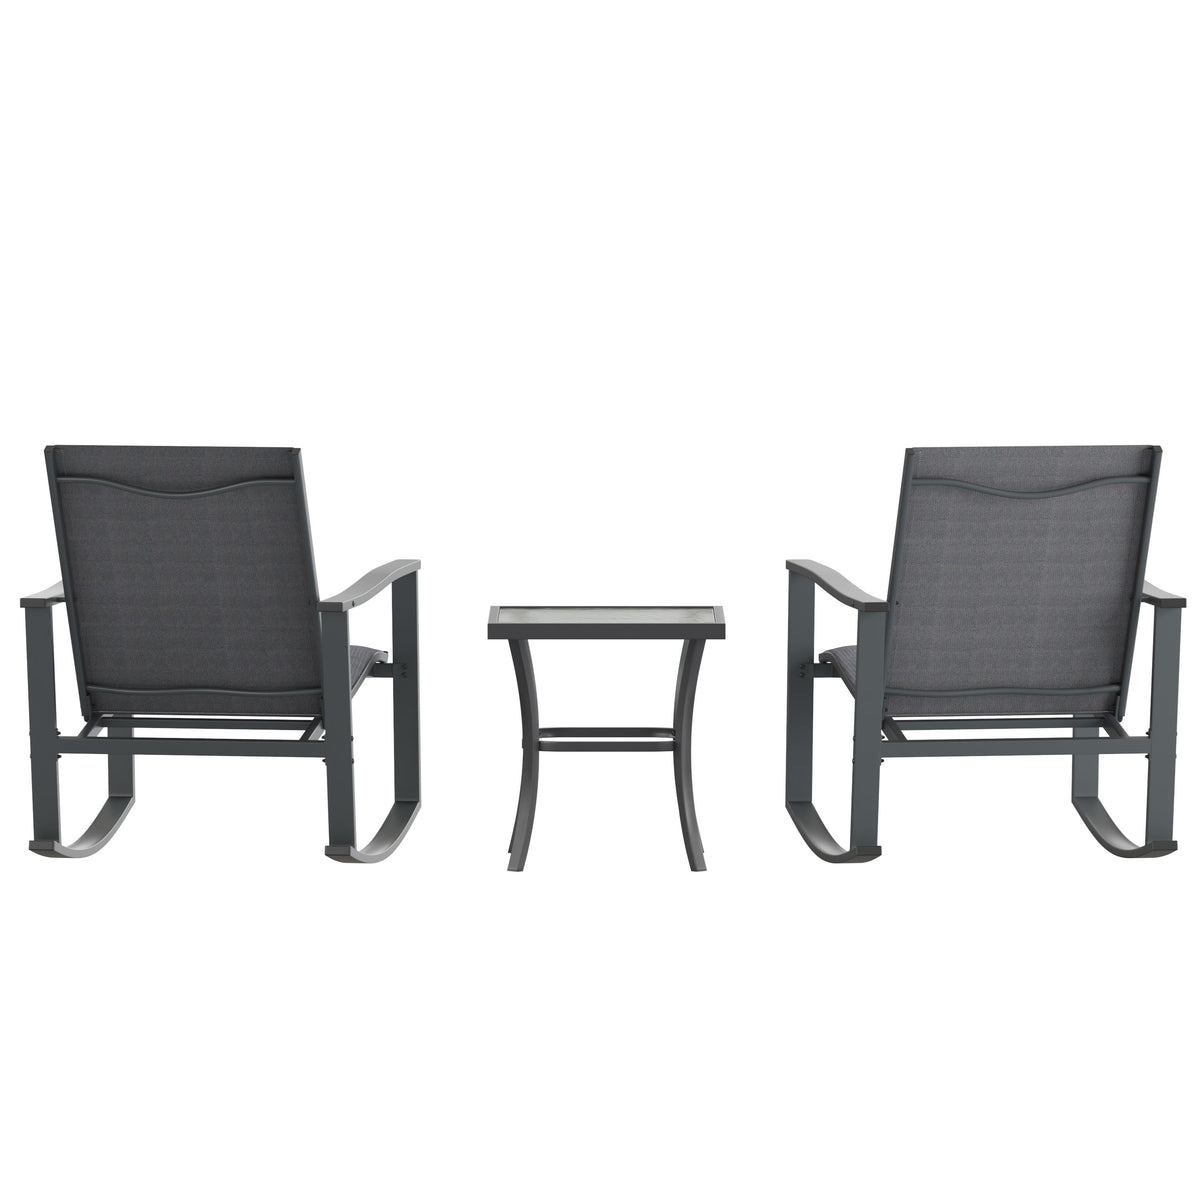 Black |#| 3 Piece All-Weather Rocking Chairs and Glass Top Table Bistro Set - Black/Black